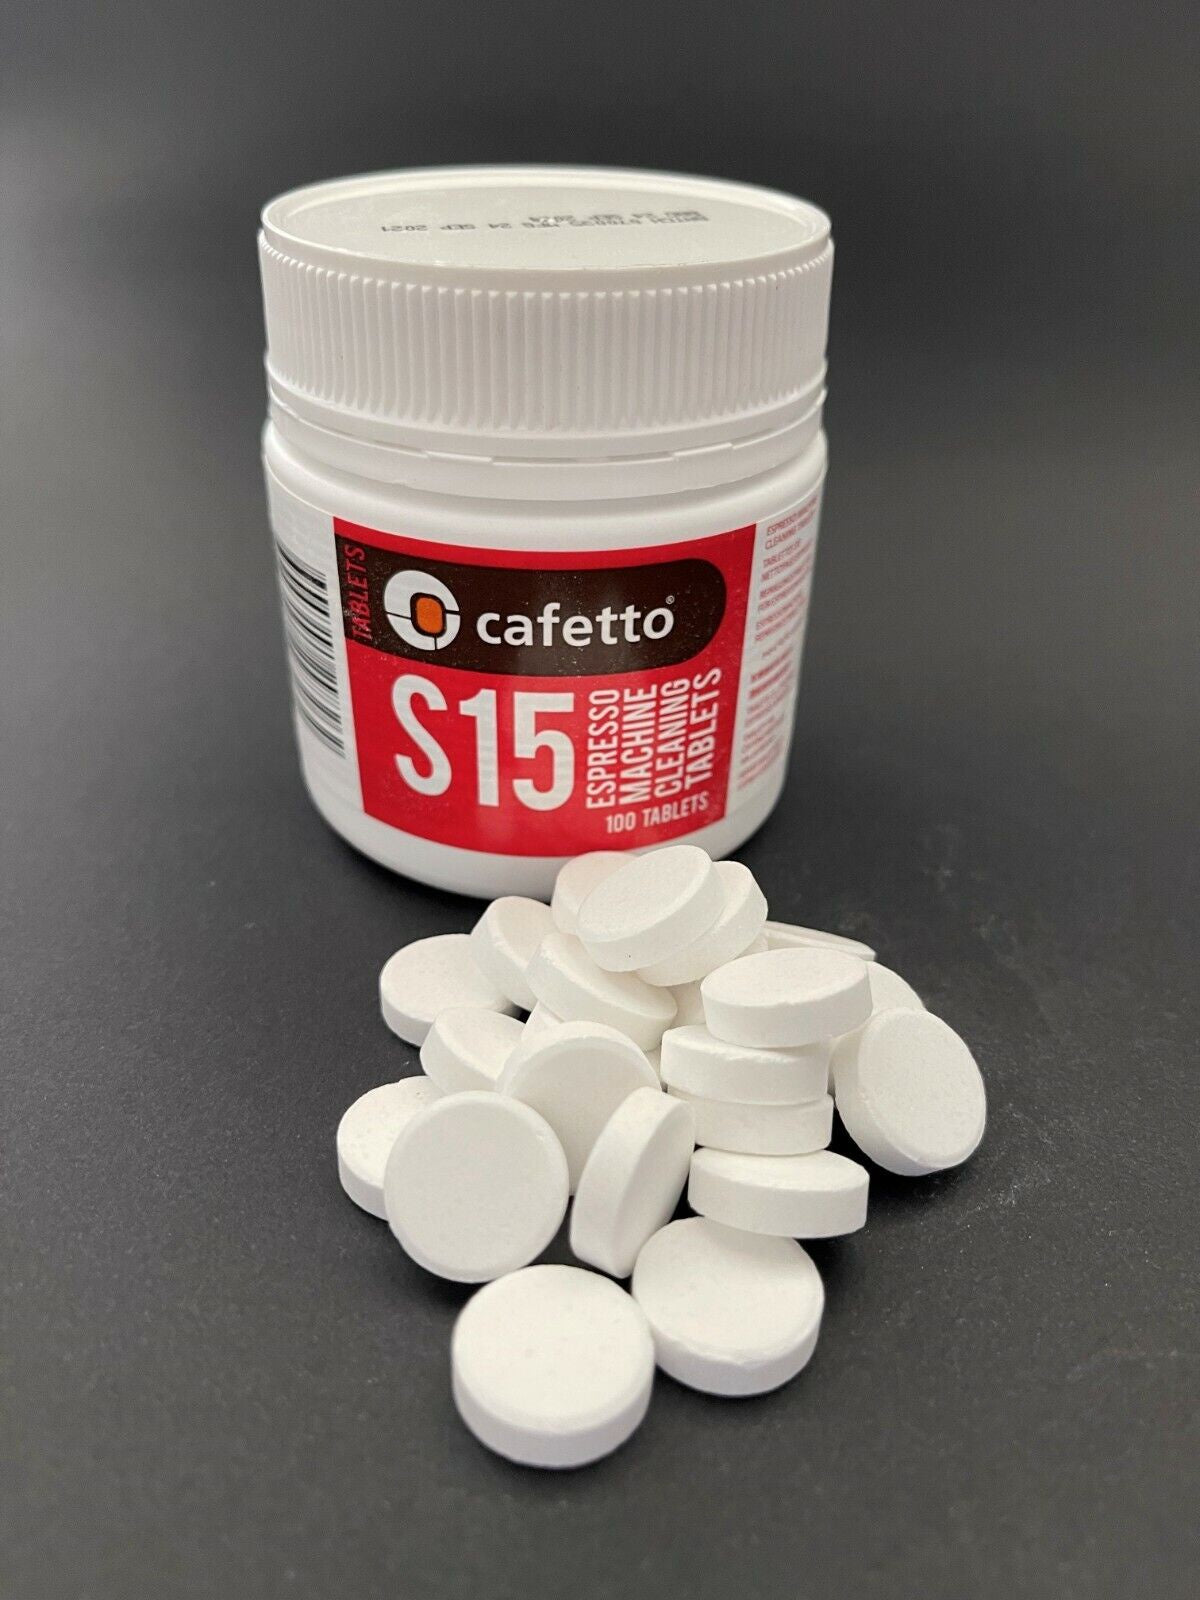 Cafetto S15 Coffee Machine Cleaning Tablets x 100